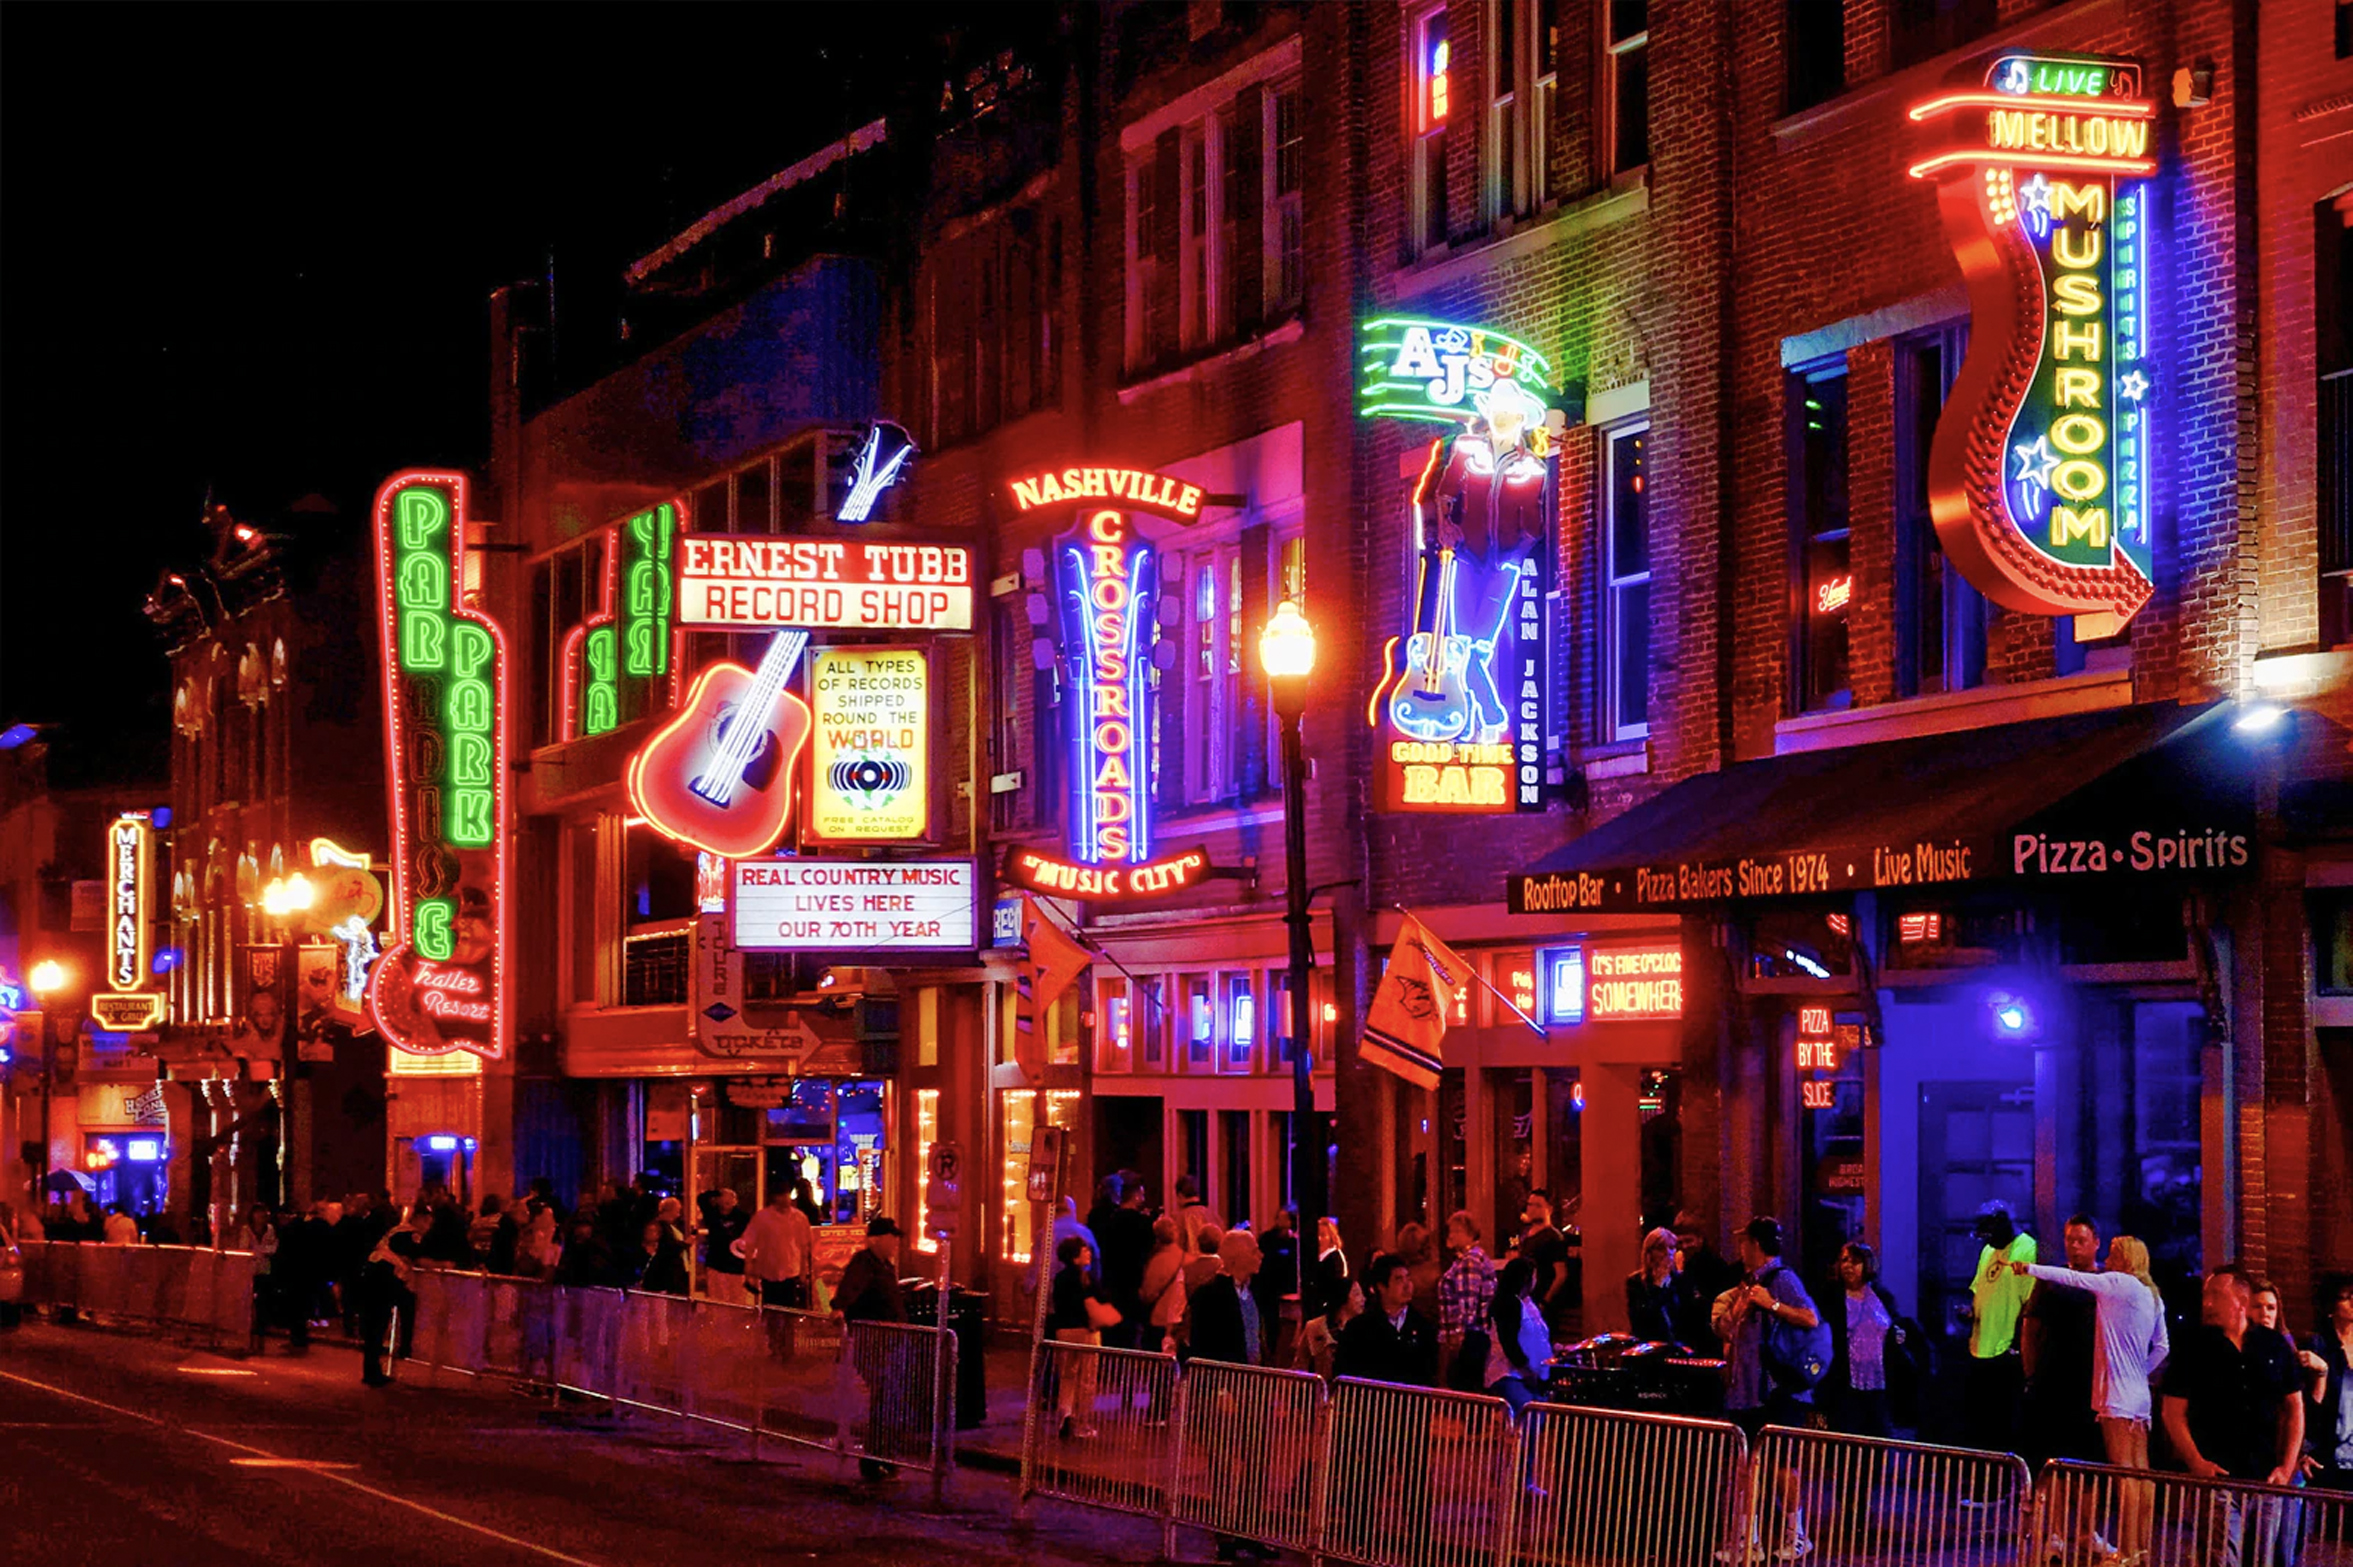 the strip in Nashville at night with neon signs on